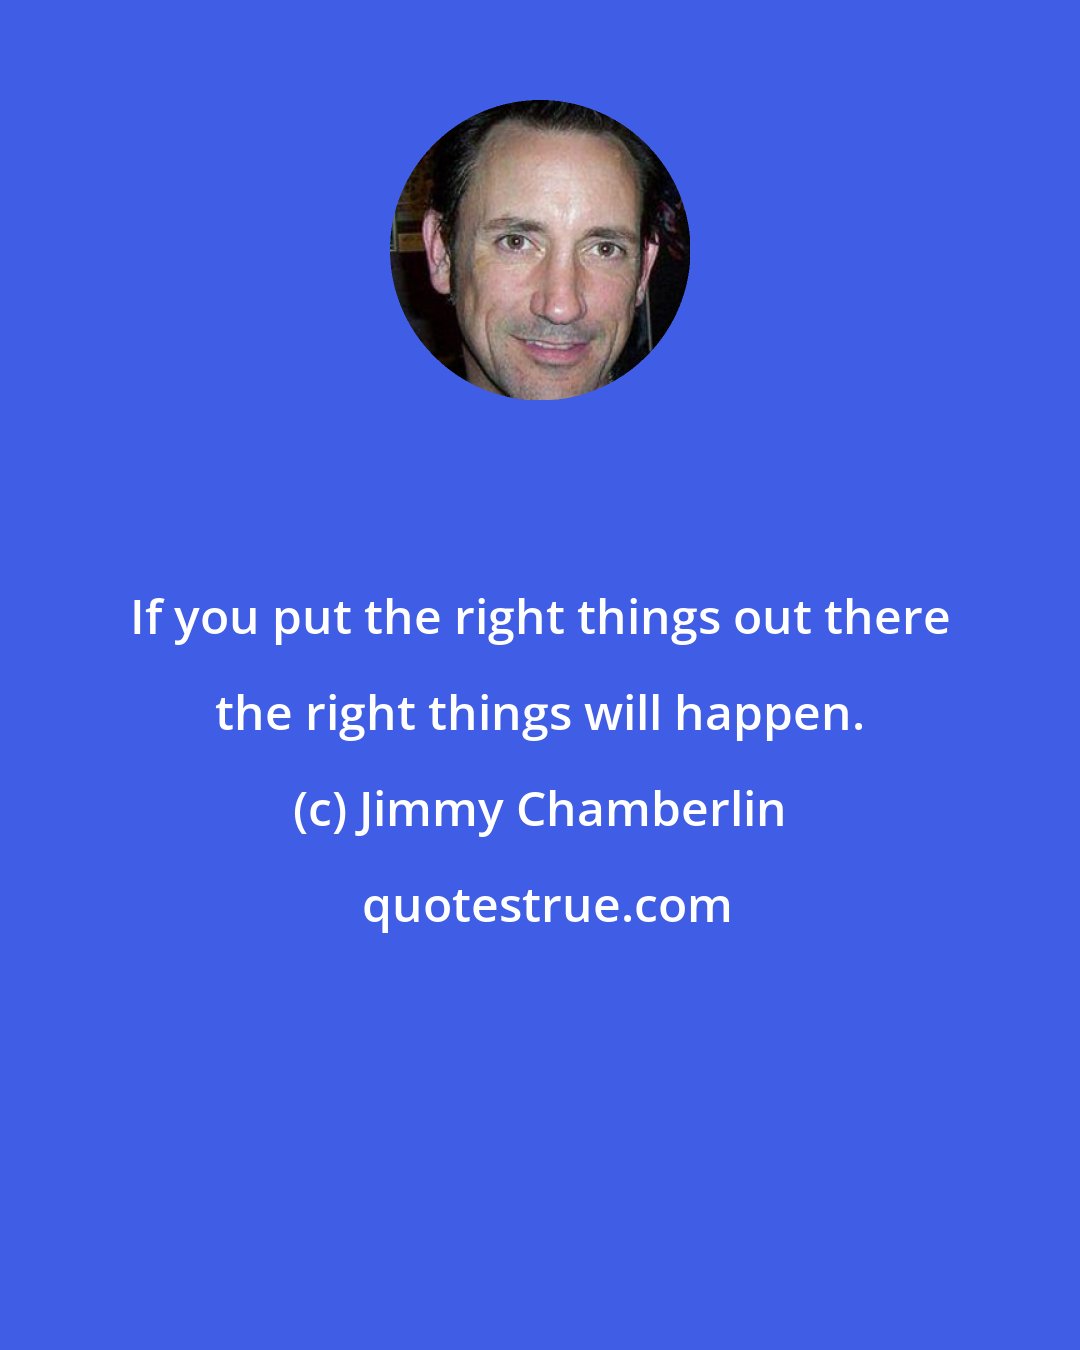 Jimmy Chamberlin: If you put the right things out there the right things will happen.